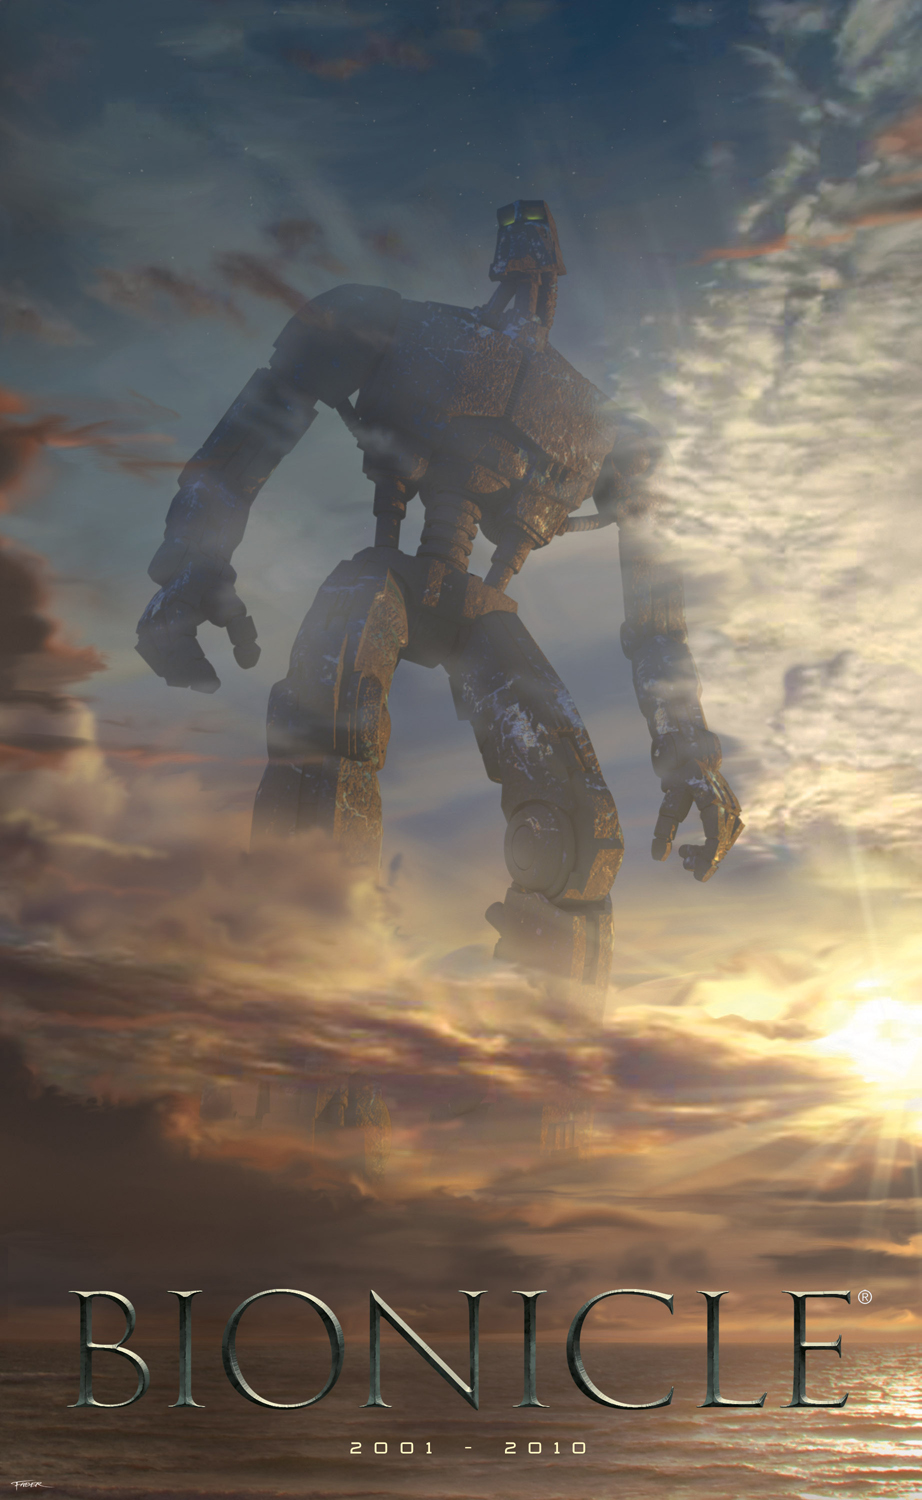 http://www.biosector01.com/wiki/images/7/79/BIONICLE_2001-2010.jpg